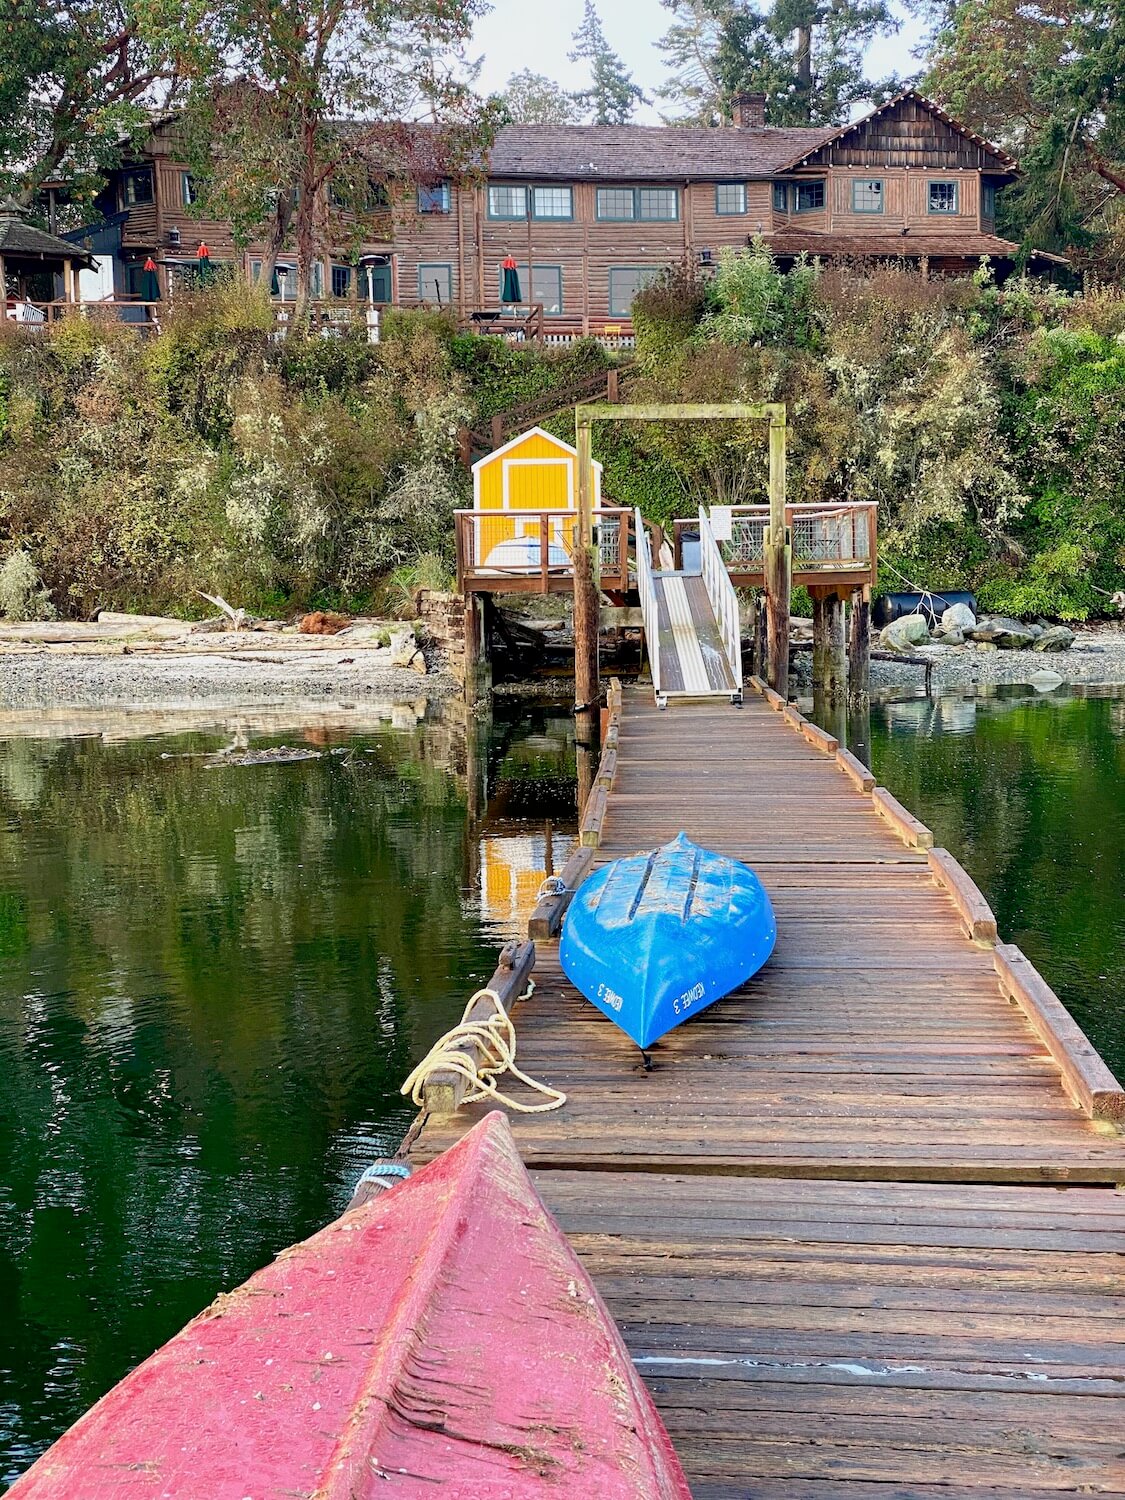 Captain Whidbey hotel, from the vantage point of Penn Cove on Whidbey Island. The dock has a red and a blue canoe turned upside down on the dock and in the distance there is a yellow boat house with white trim. The hotel sits above the water in a commanding position.